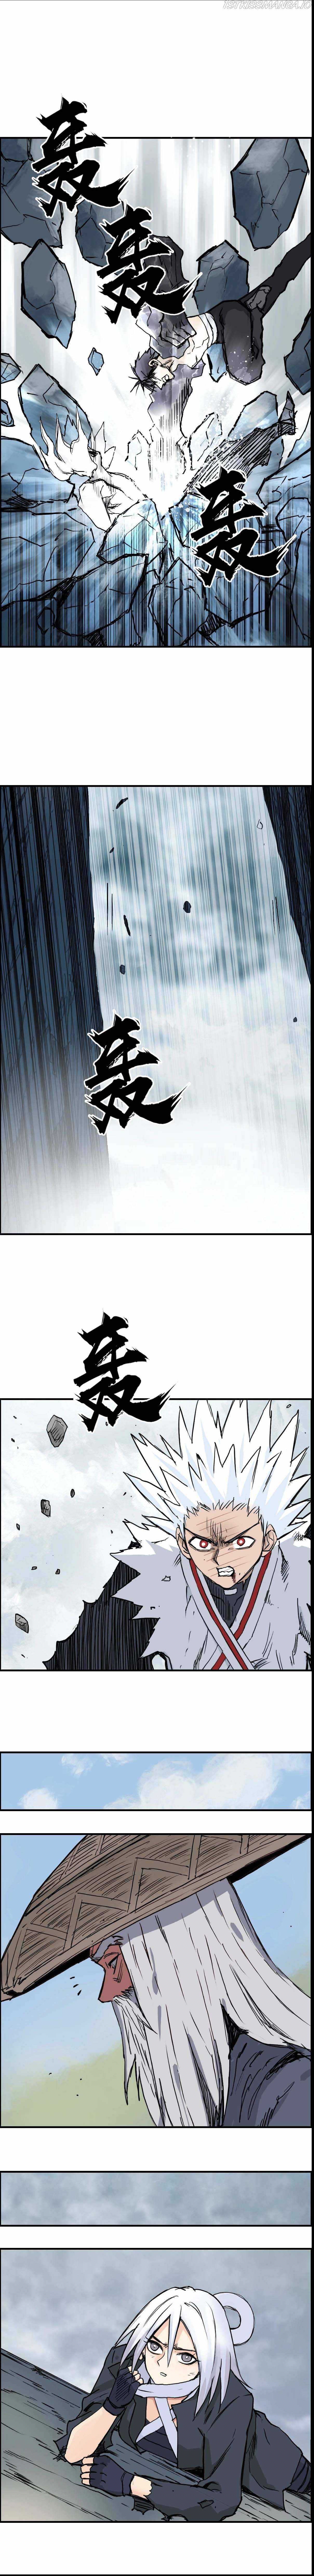 Super Cube Chapter 233 - Page 4